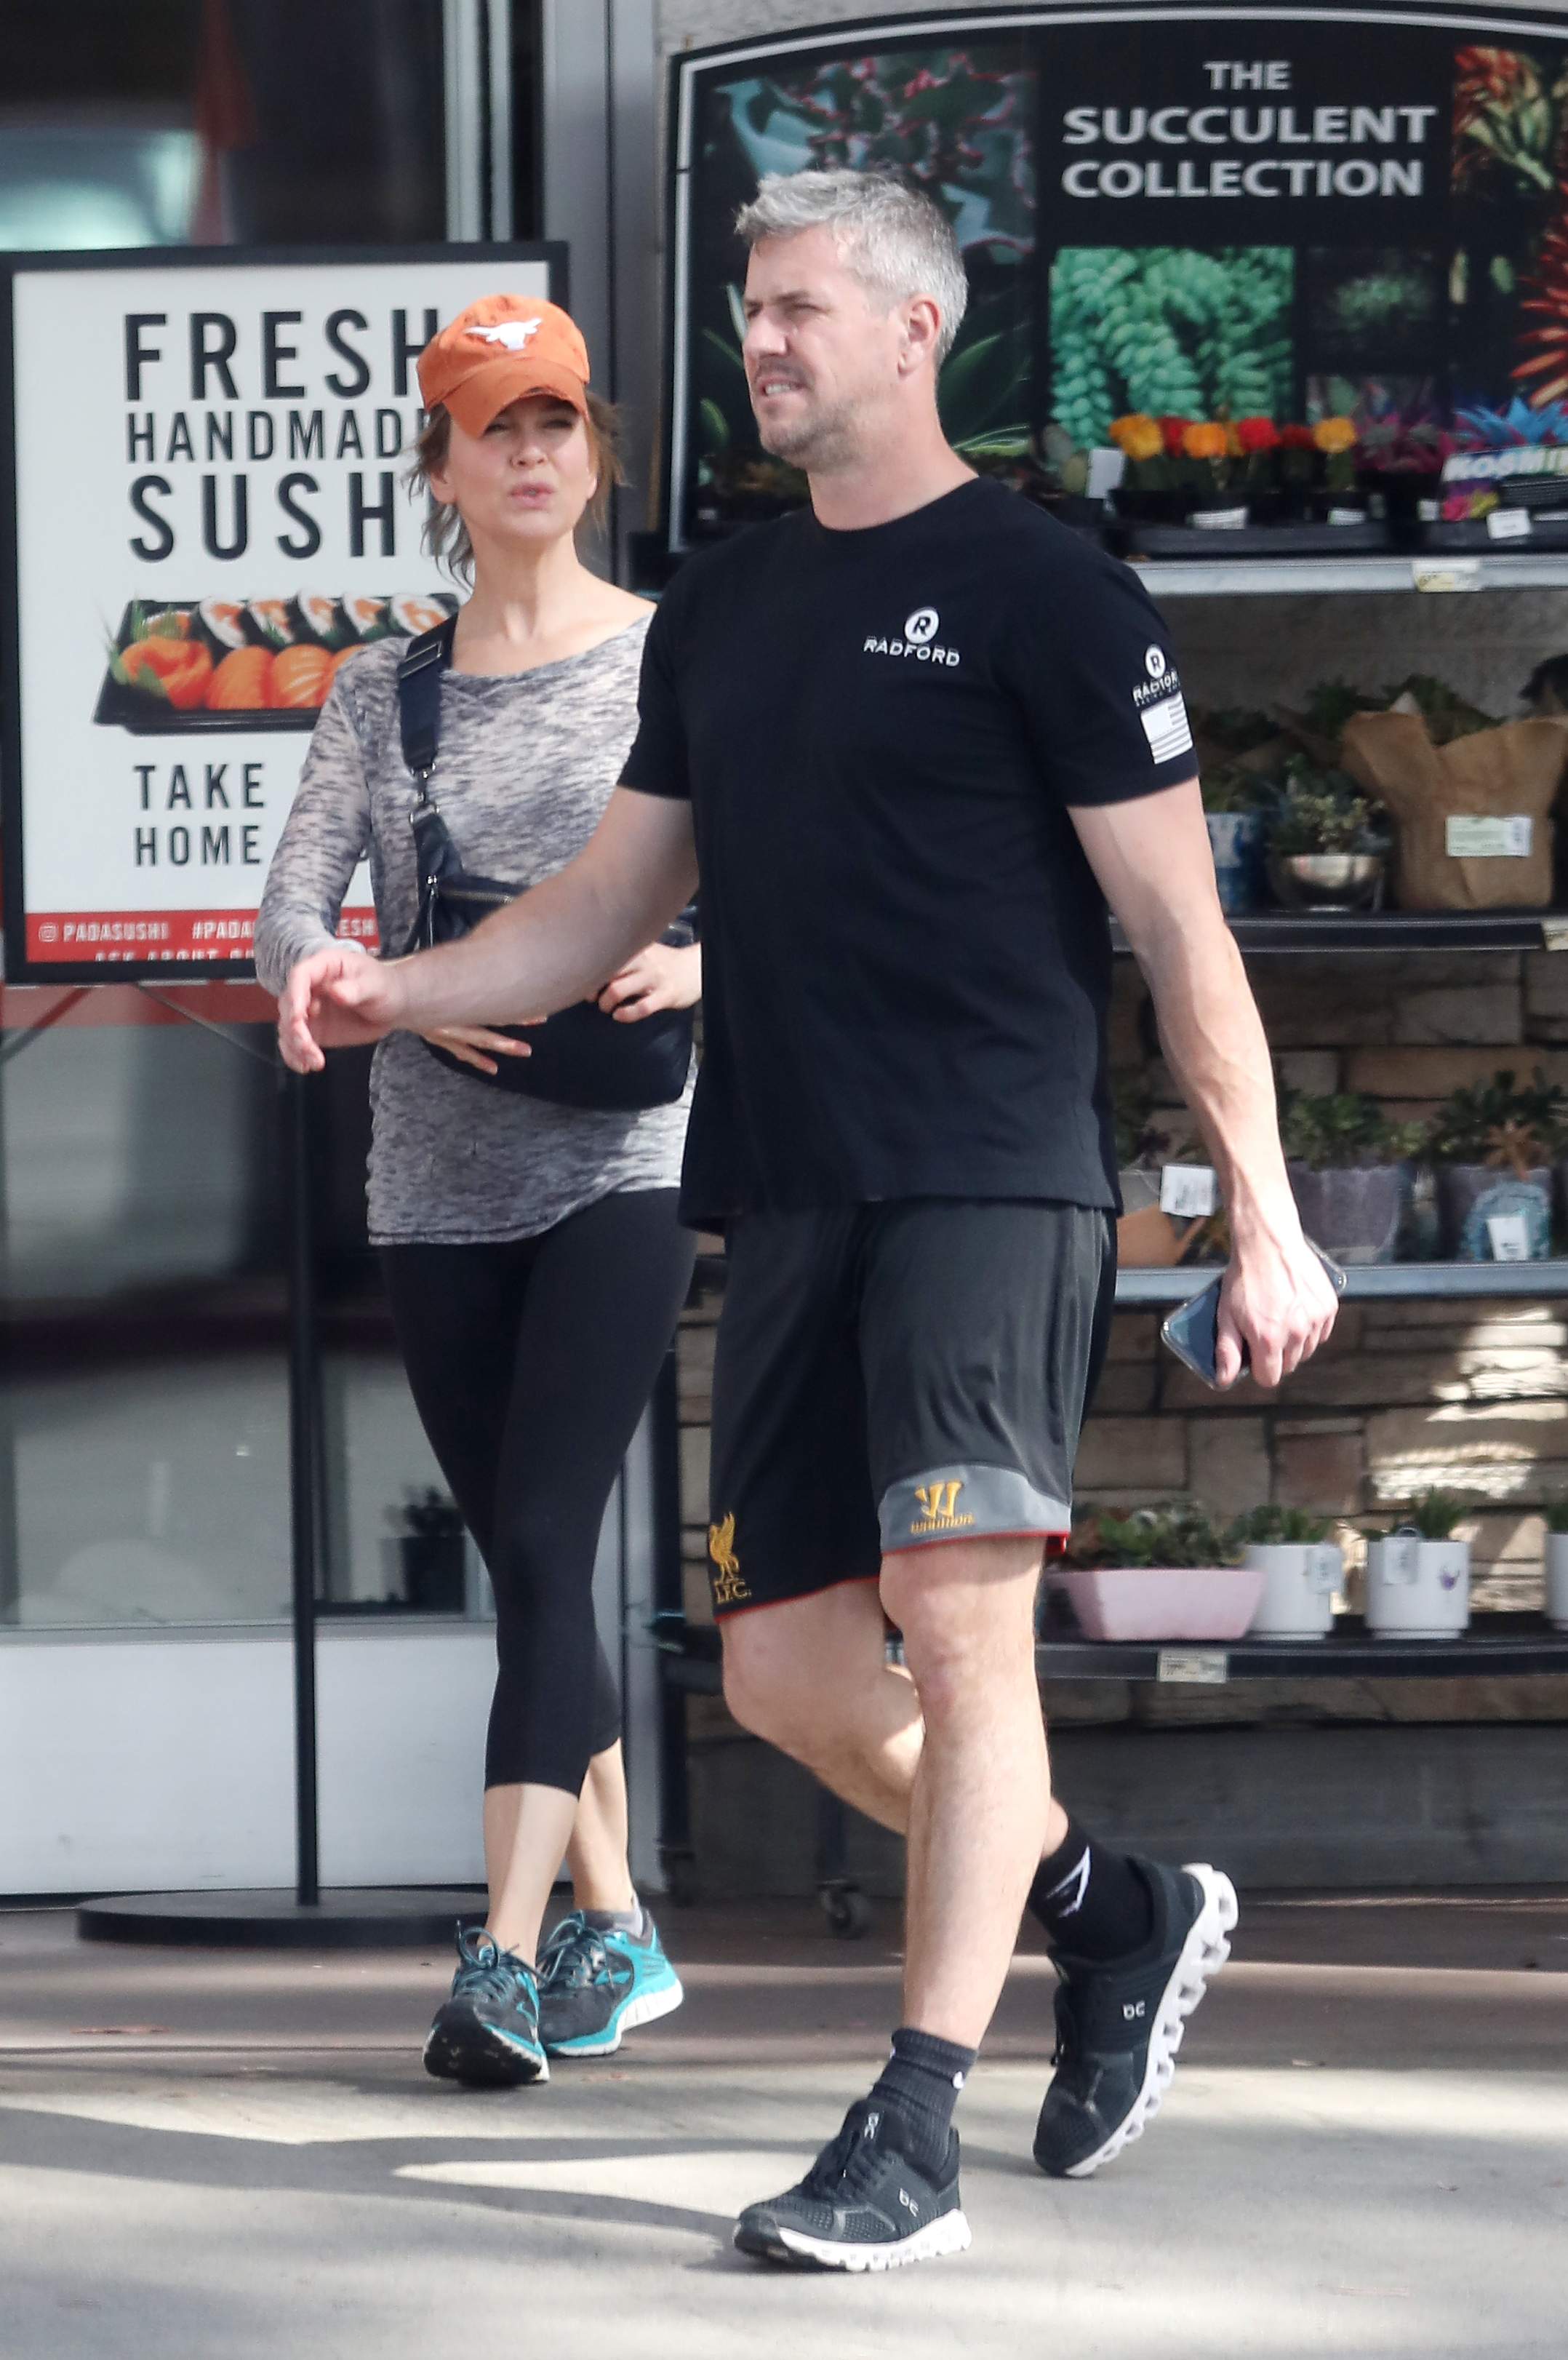 romantic walk  Renée Zellweger and Ant Anstead went for a walk through the streets of their neighborhood and took the opportunity to play sports, which is why they dressed accordingly.  The actress also wore an orange cap